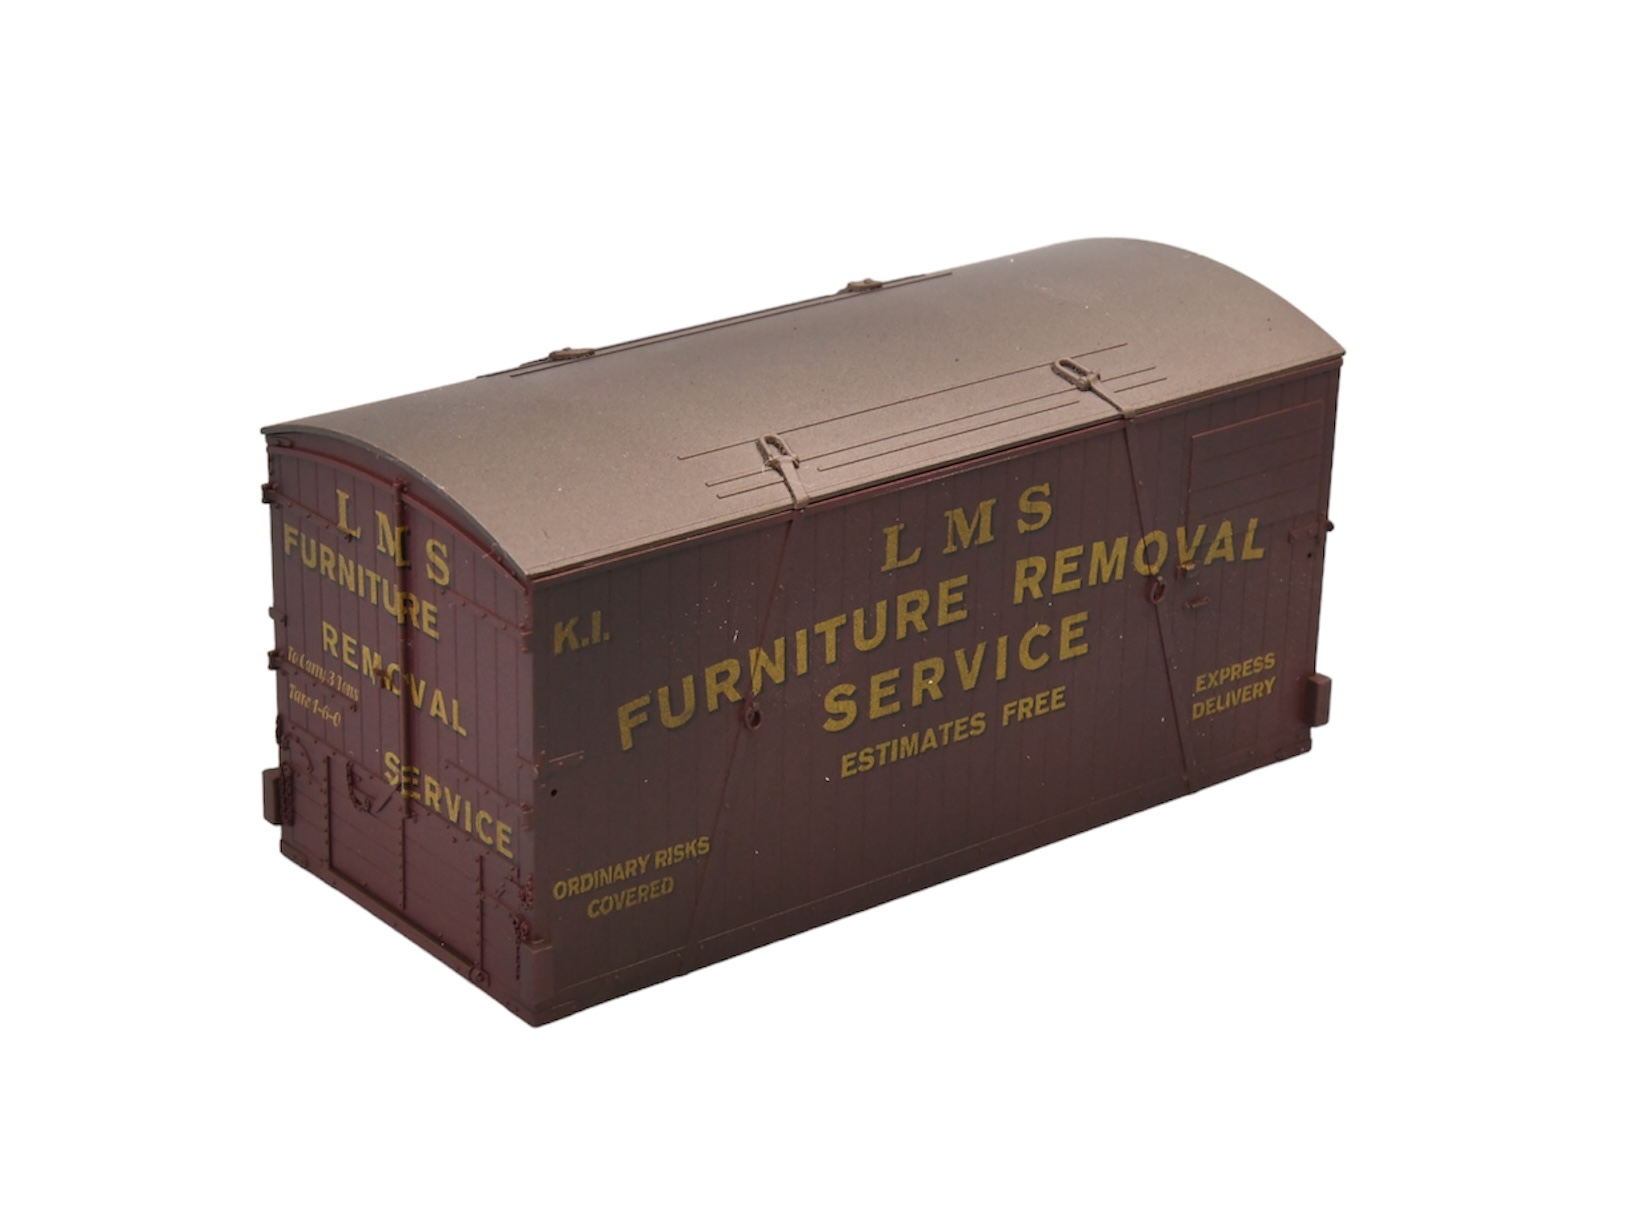 7F-037-017W Container LMS Furniture Removal Wthd